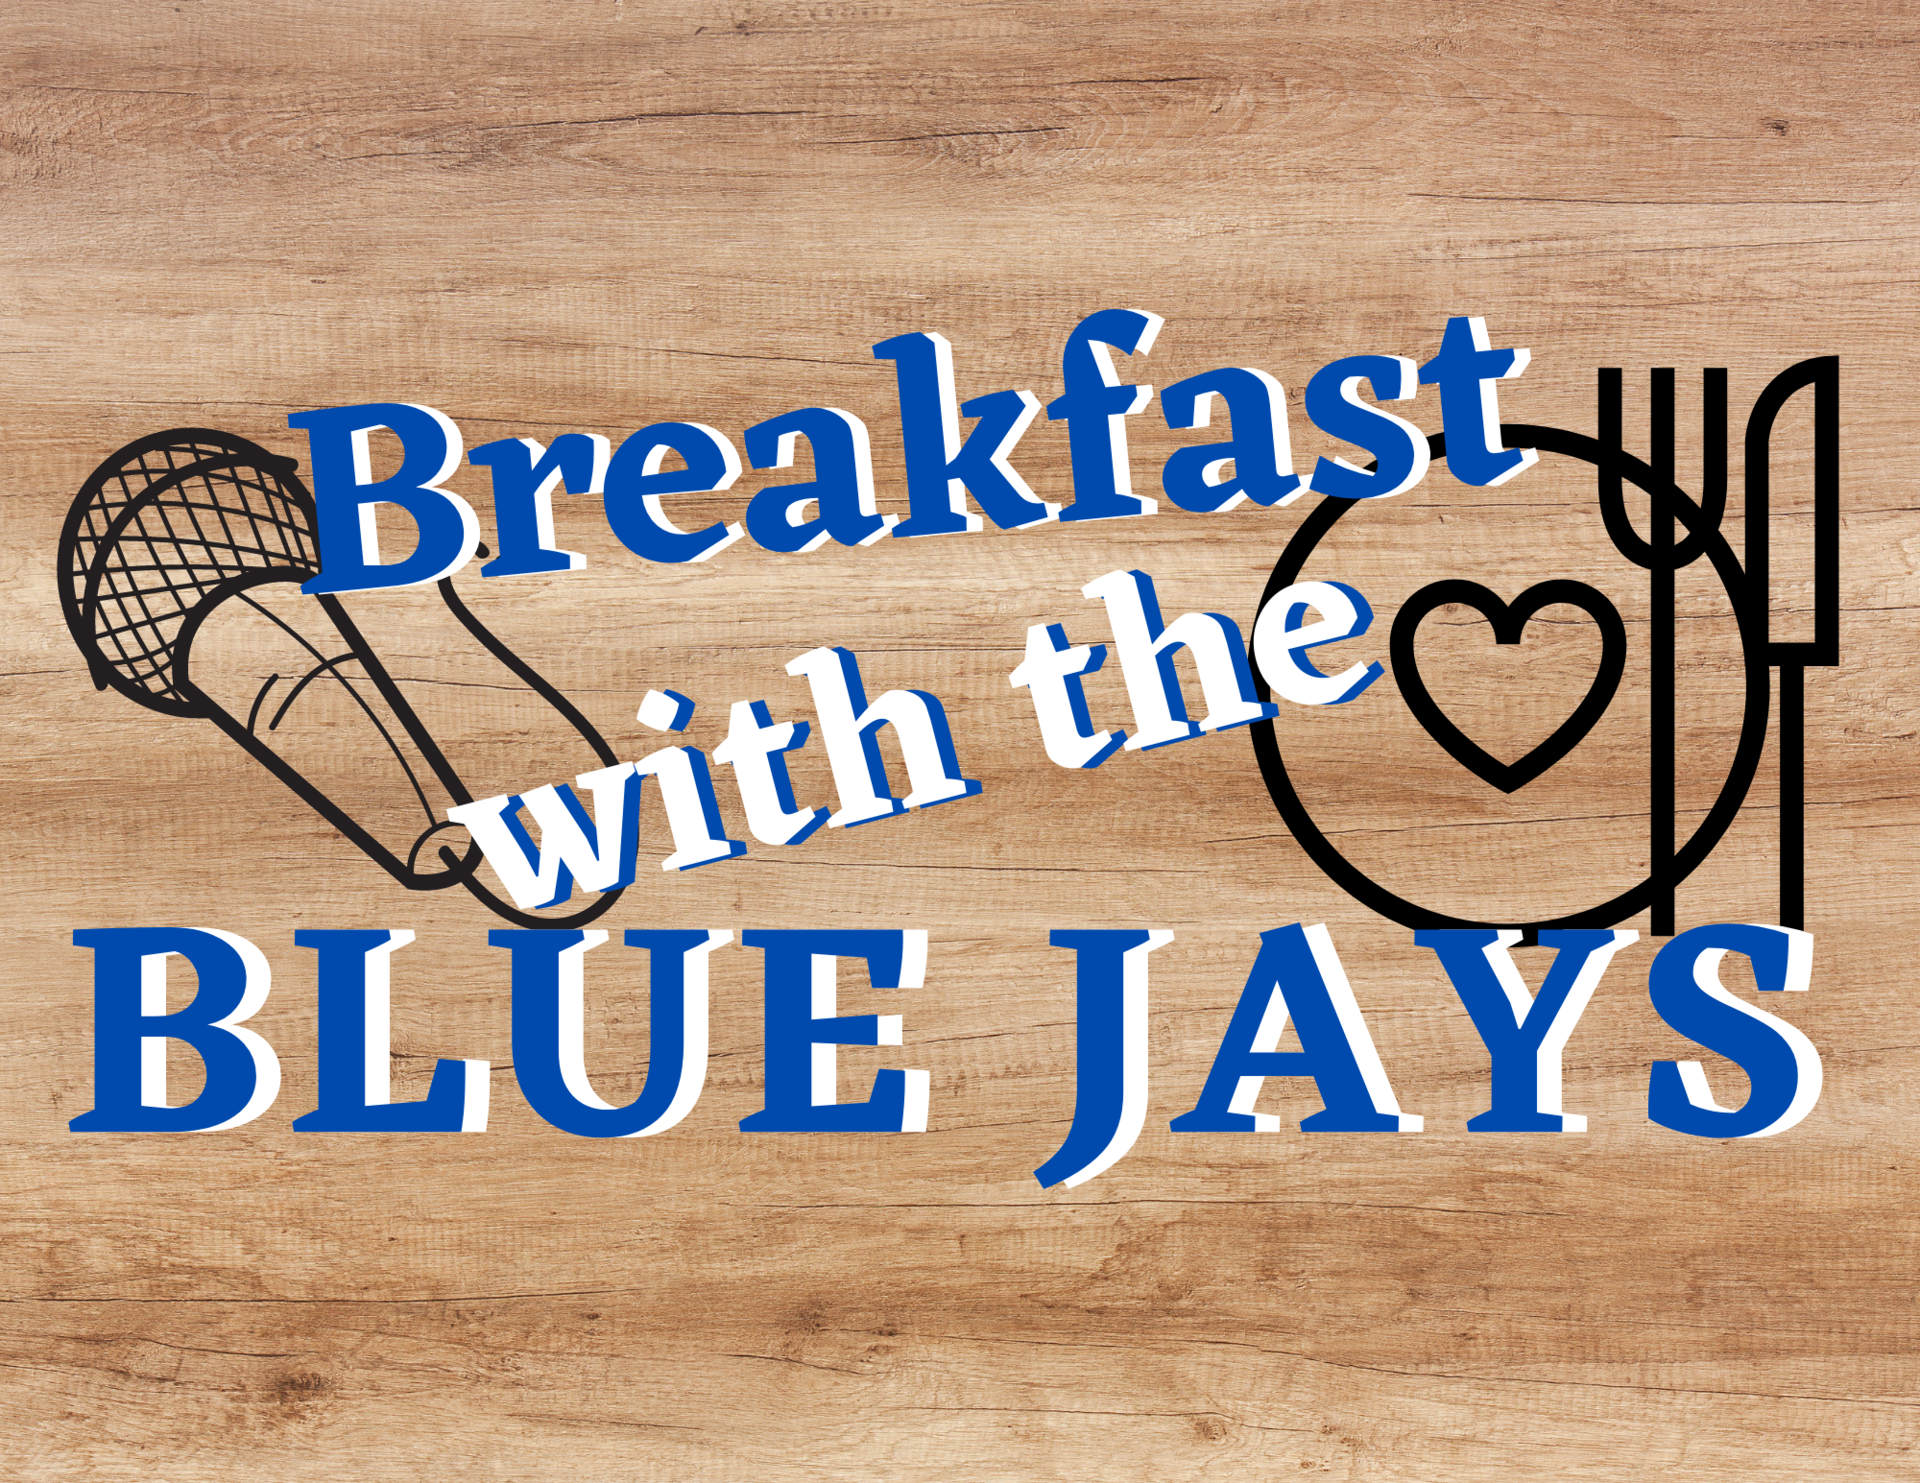 Breakfast with the blue jays